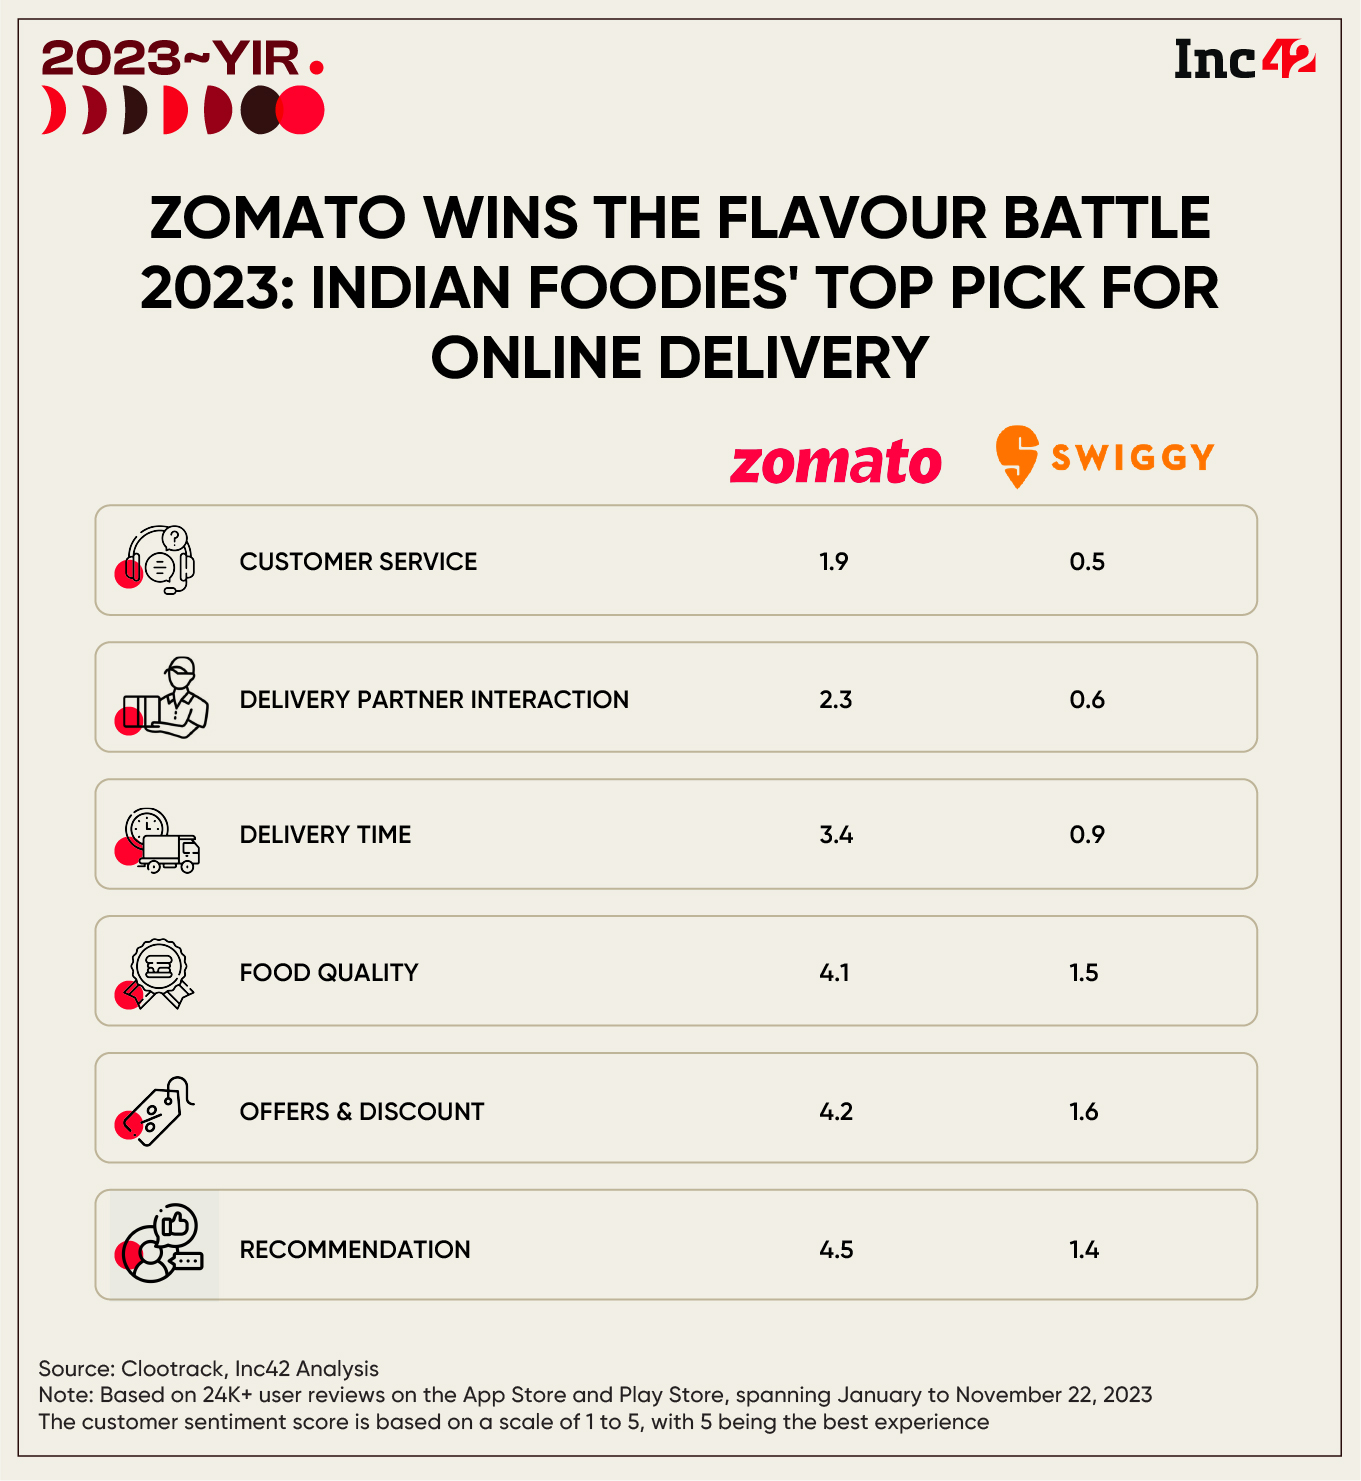 Zomato-Swiggy War Is On: How The Duopoly Fared In 2023 & The Outlook For 2024 